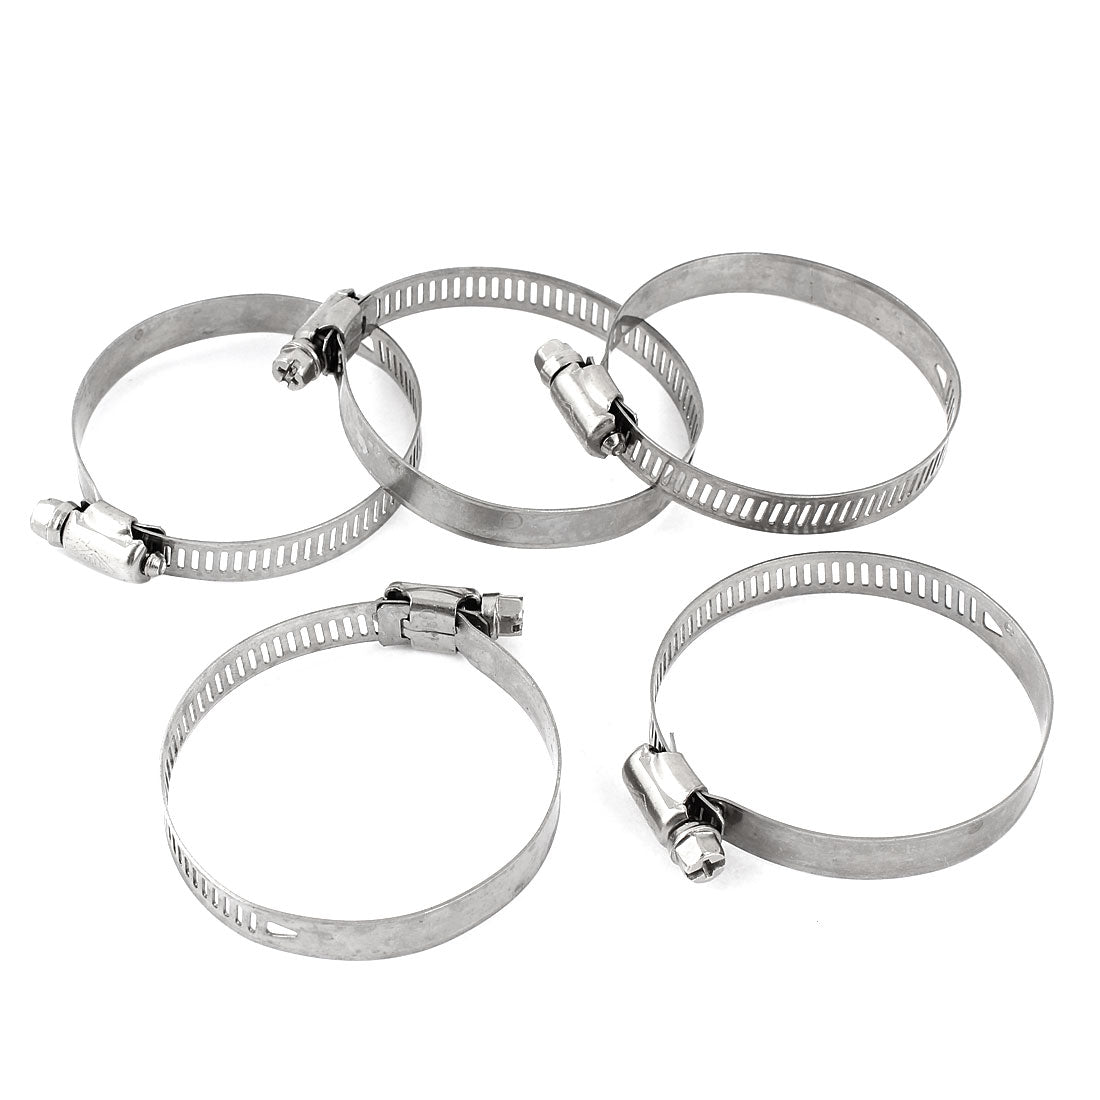 uxcell Uxcell 5Pcs 40mm-64mm Car Metal Adjustable Band Hose Clamp Cable Tight Click